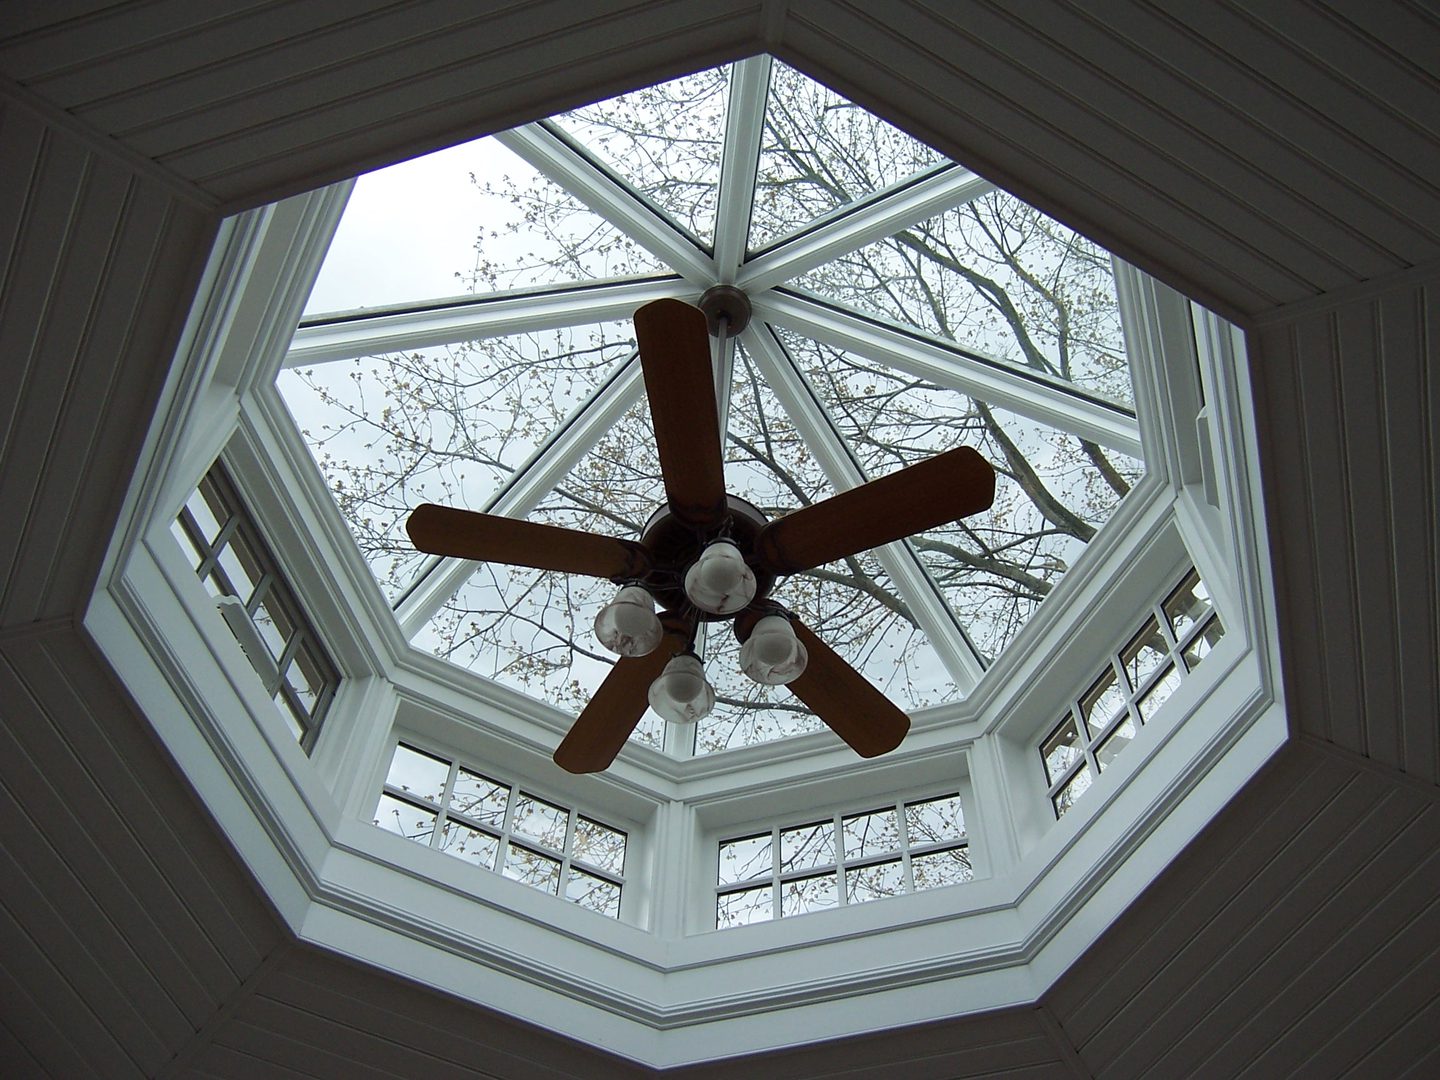 A ceiling fan in the center of a room.